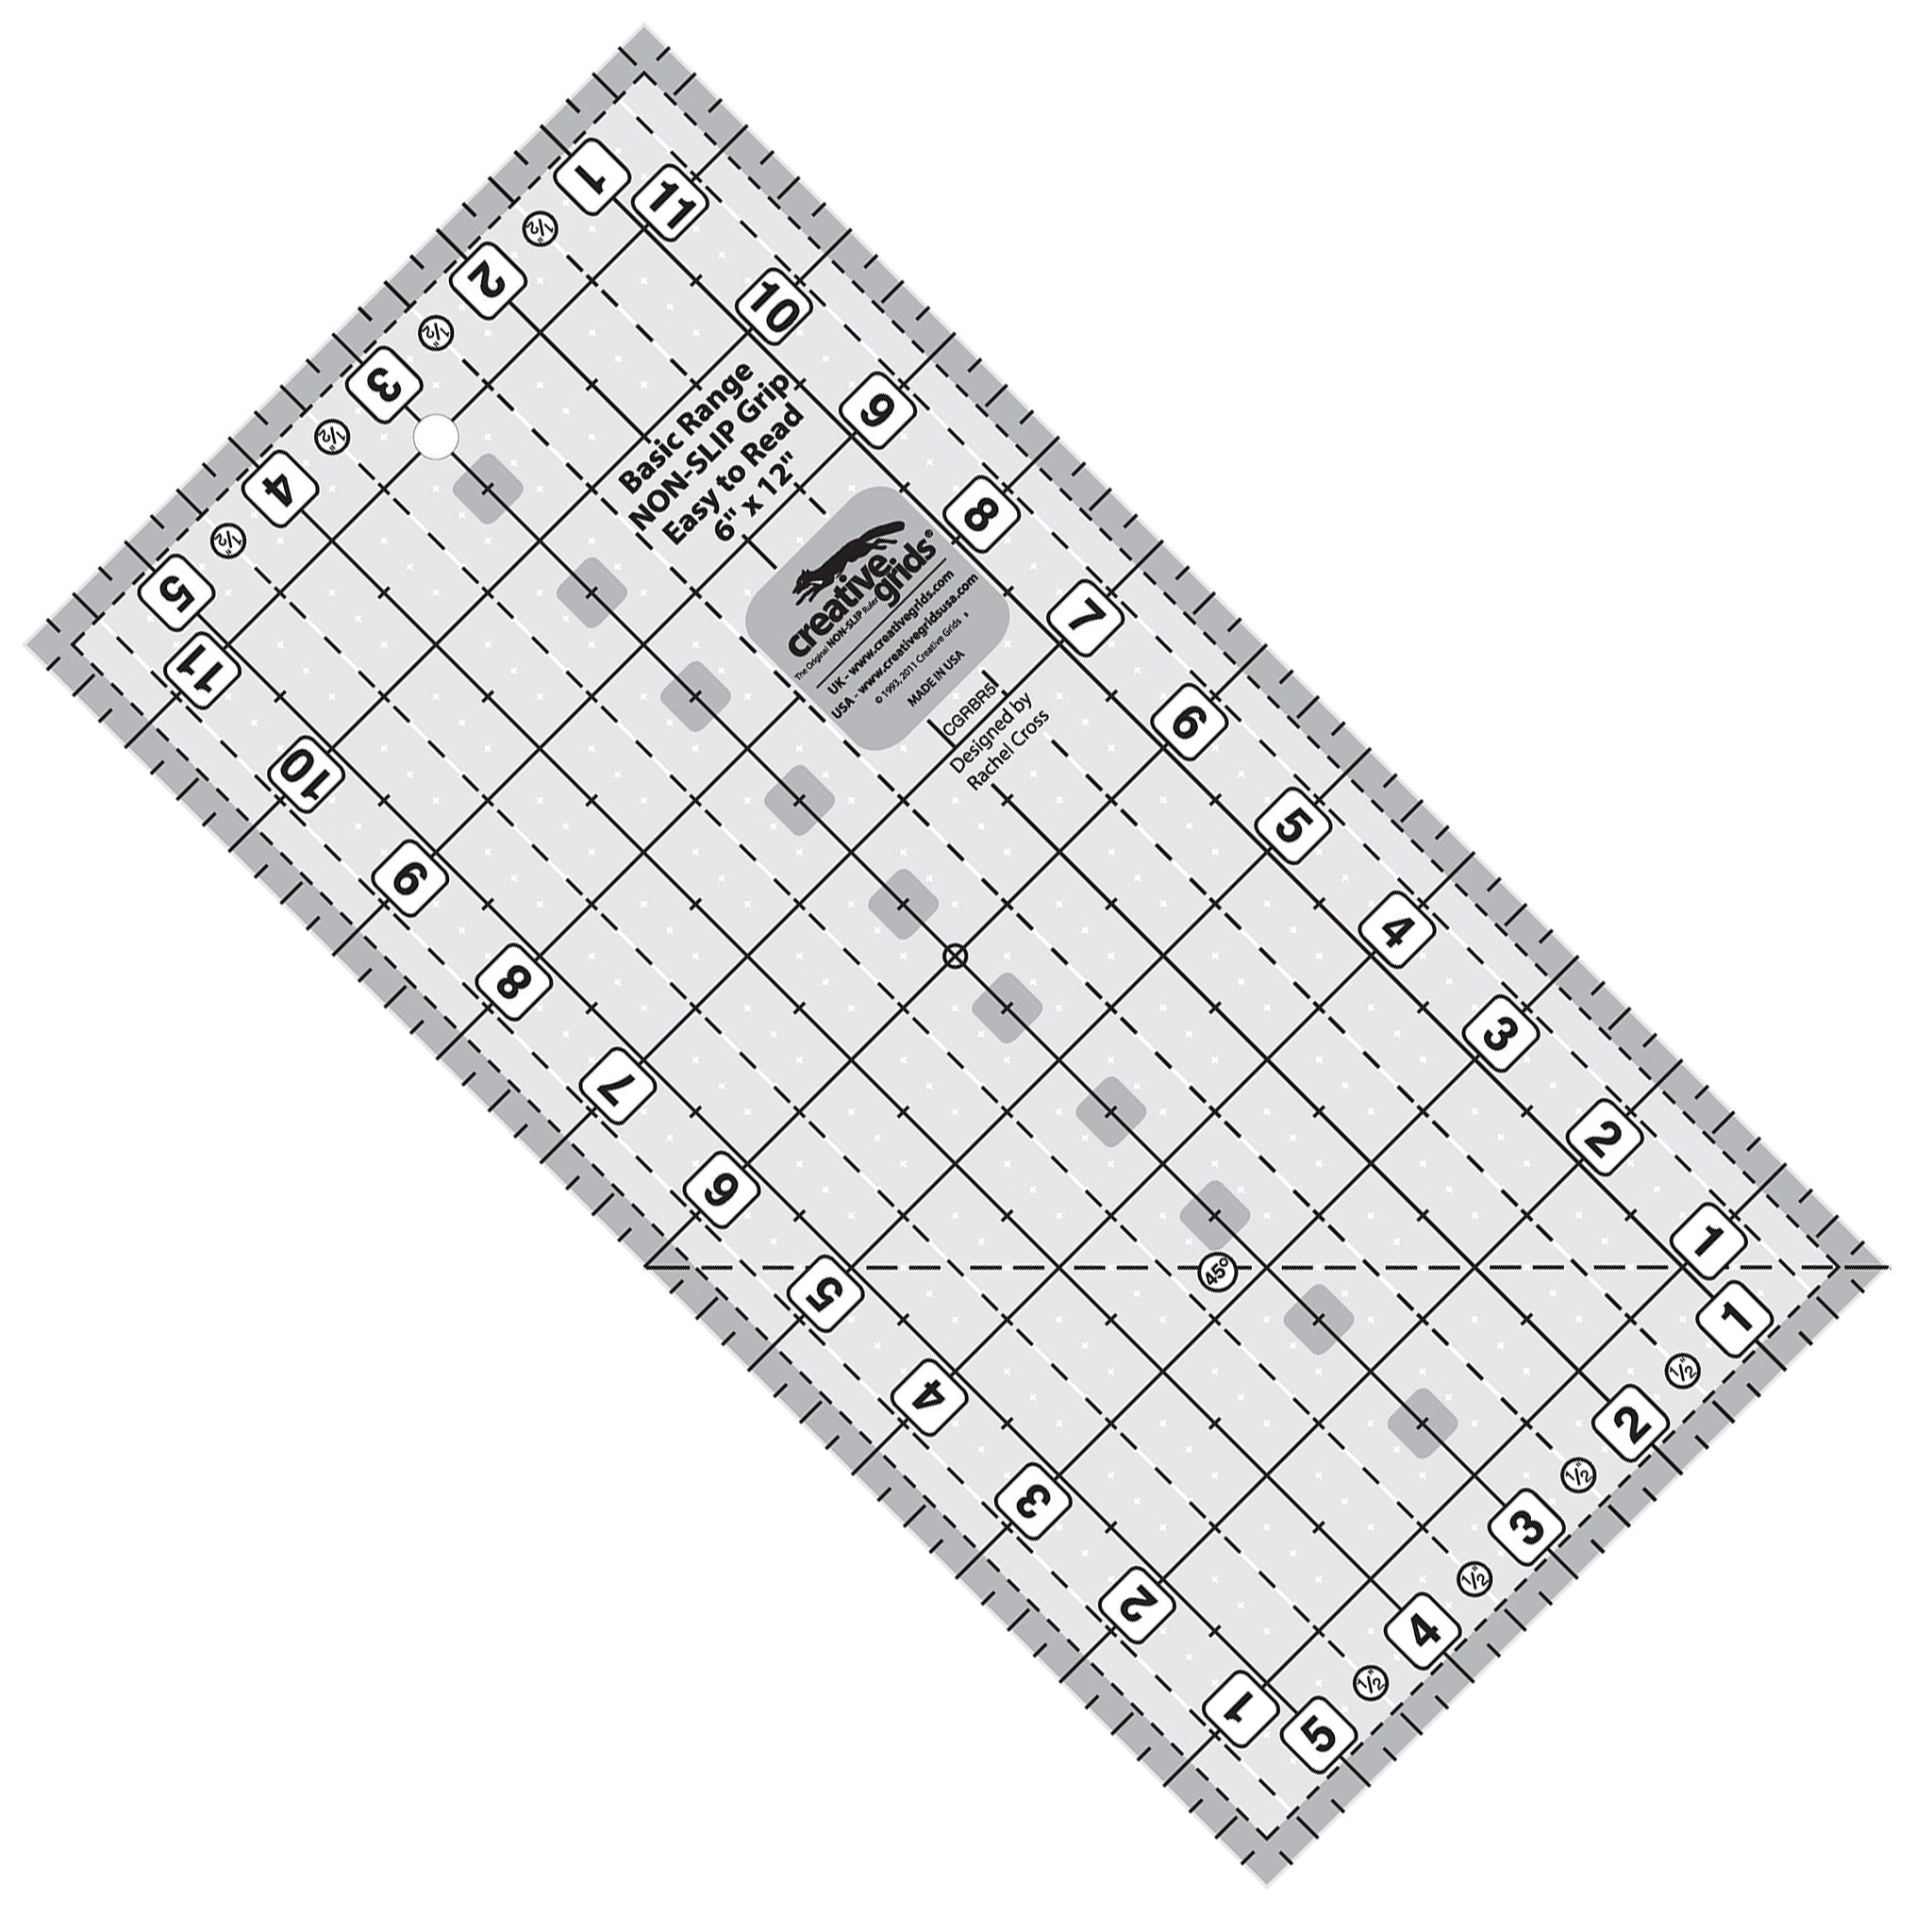 Creative Grids Basic Range 6-Inch X 12-Inch Rectangle Quilt Ruler (CGRBR5)